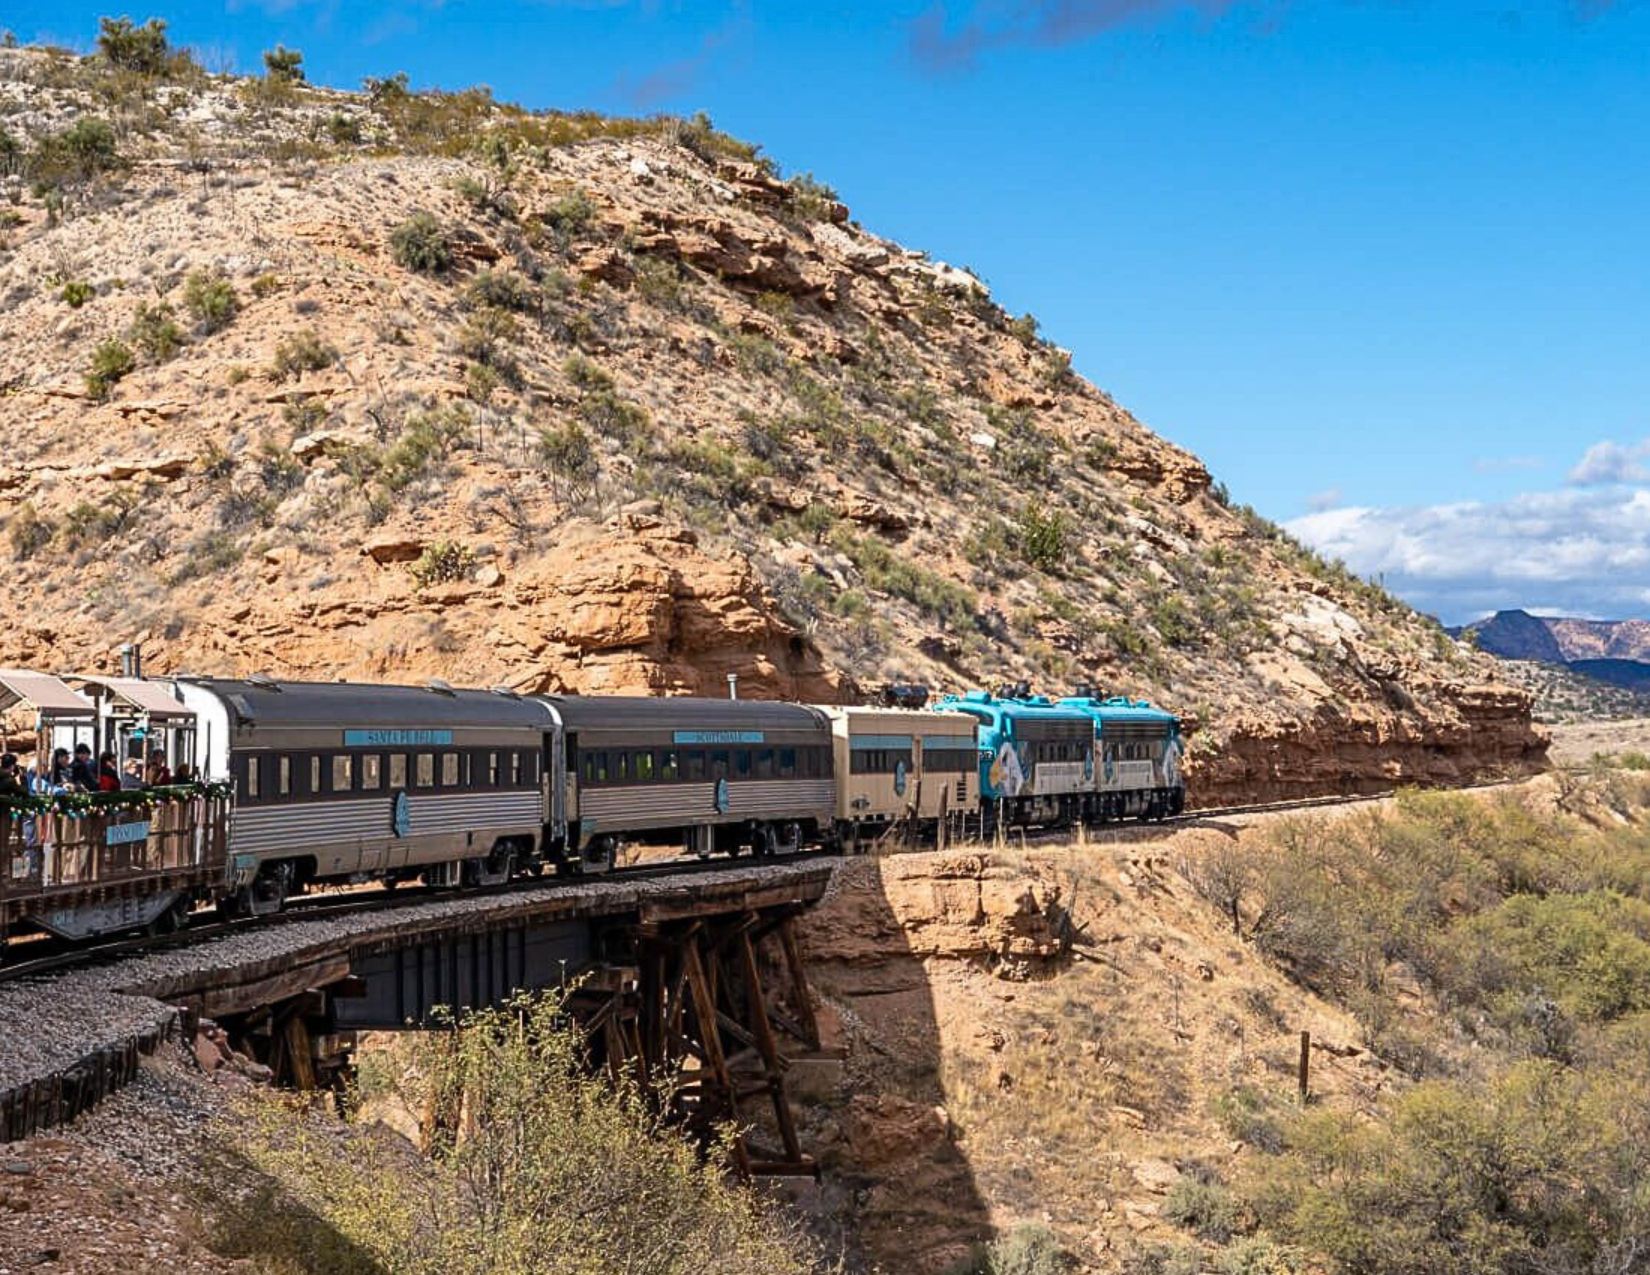 The Verde Canyon Railroad touring through the desert in northern Arizona